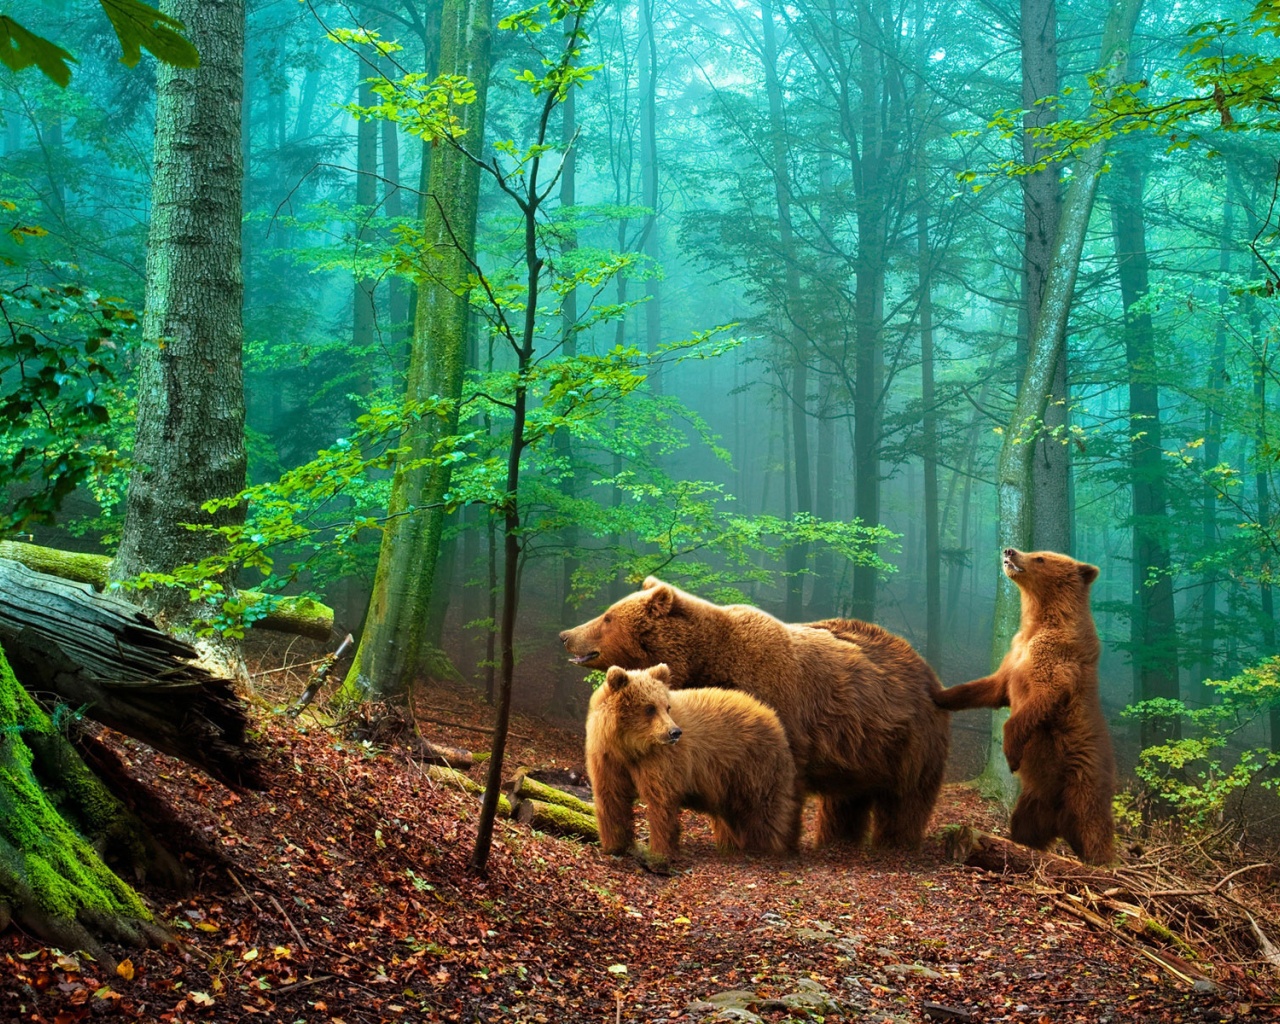 Brown Bears In The Forest